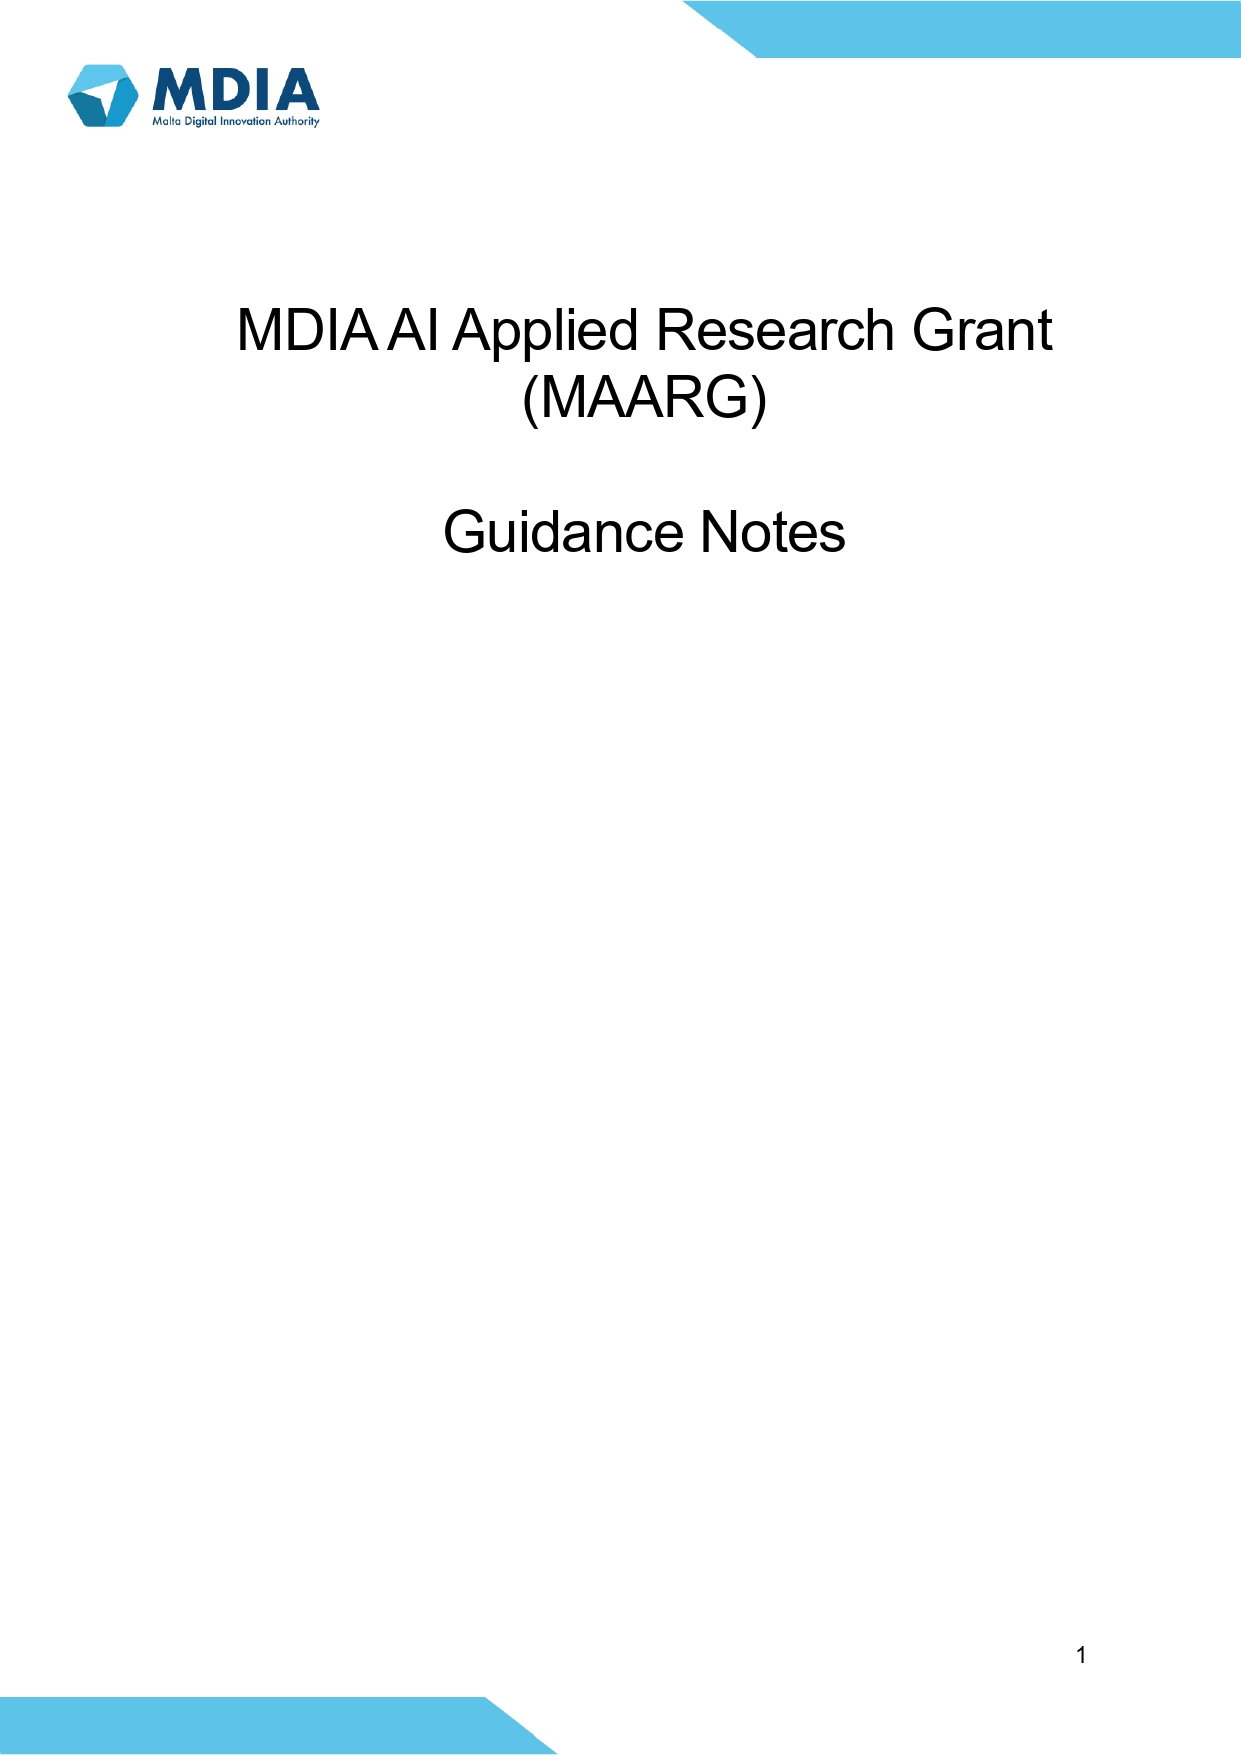 MDIA Schemes - AI Research Grant - Guidance Notes